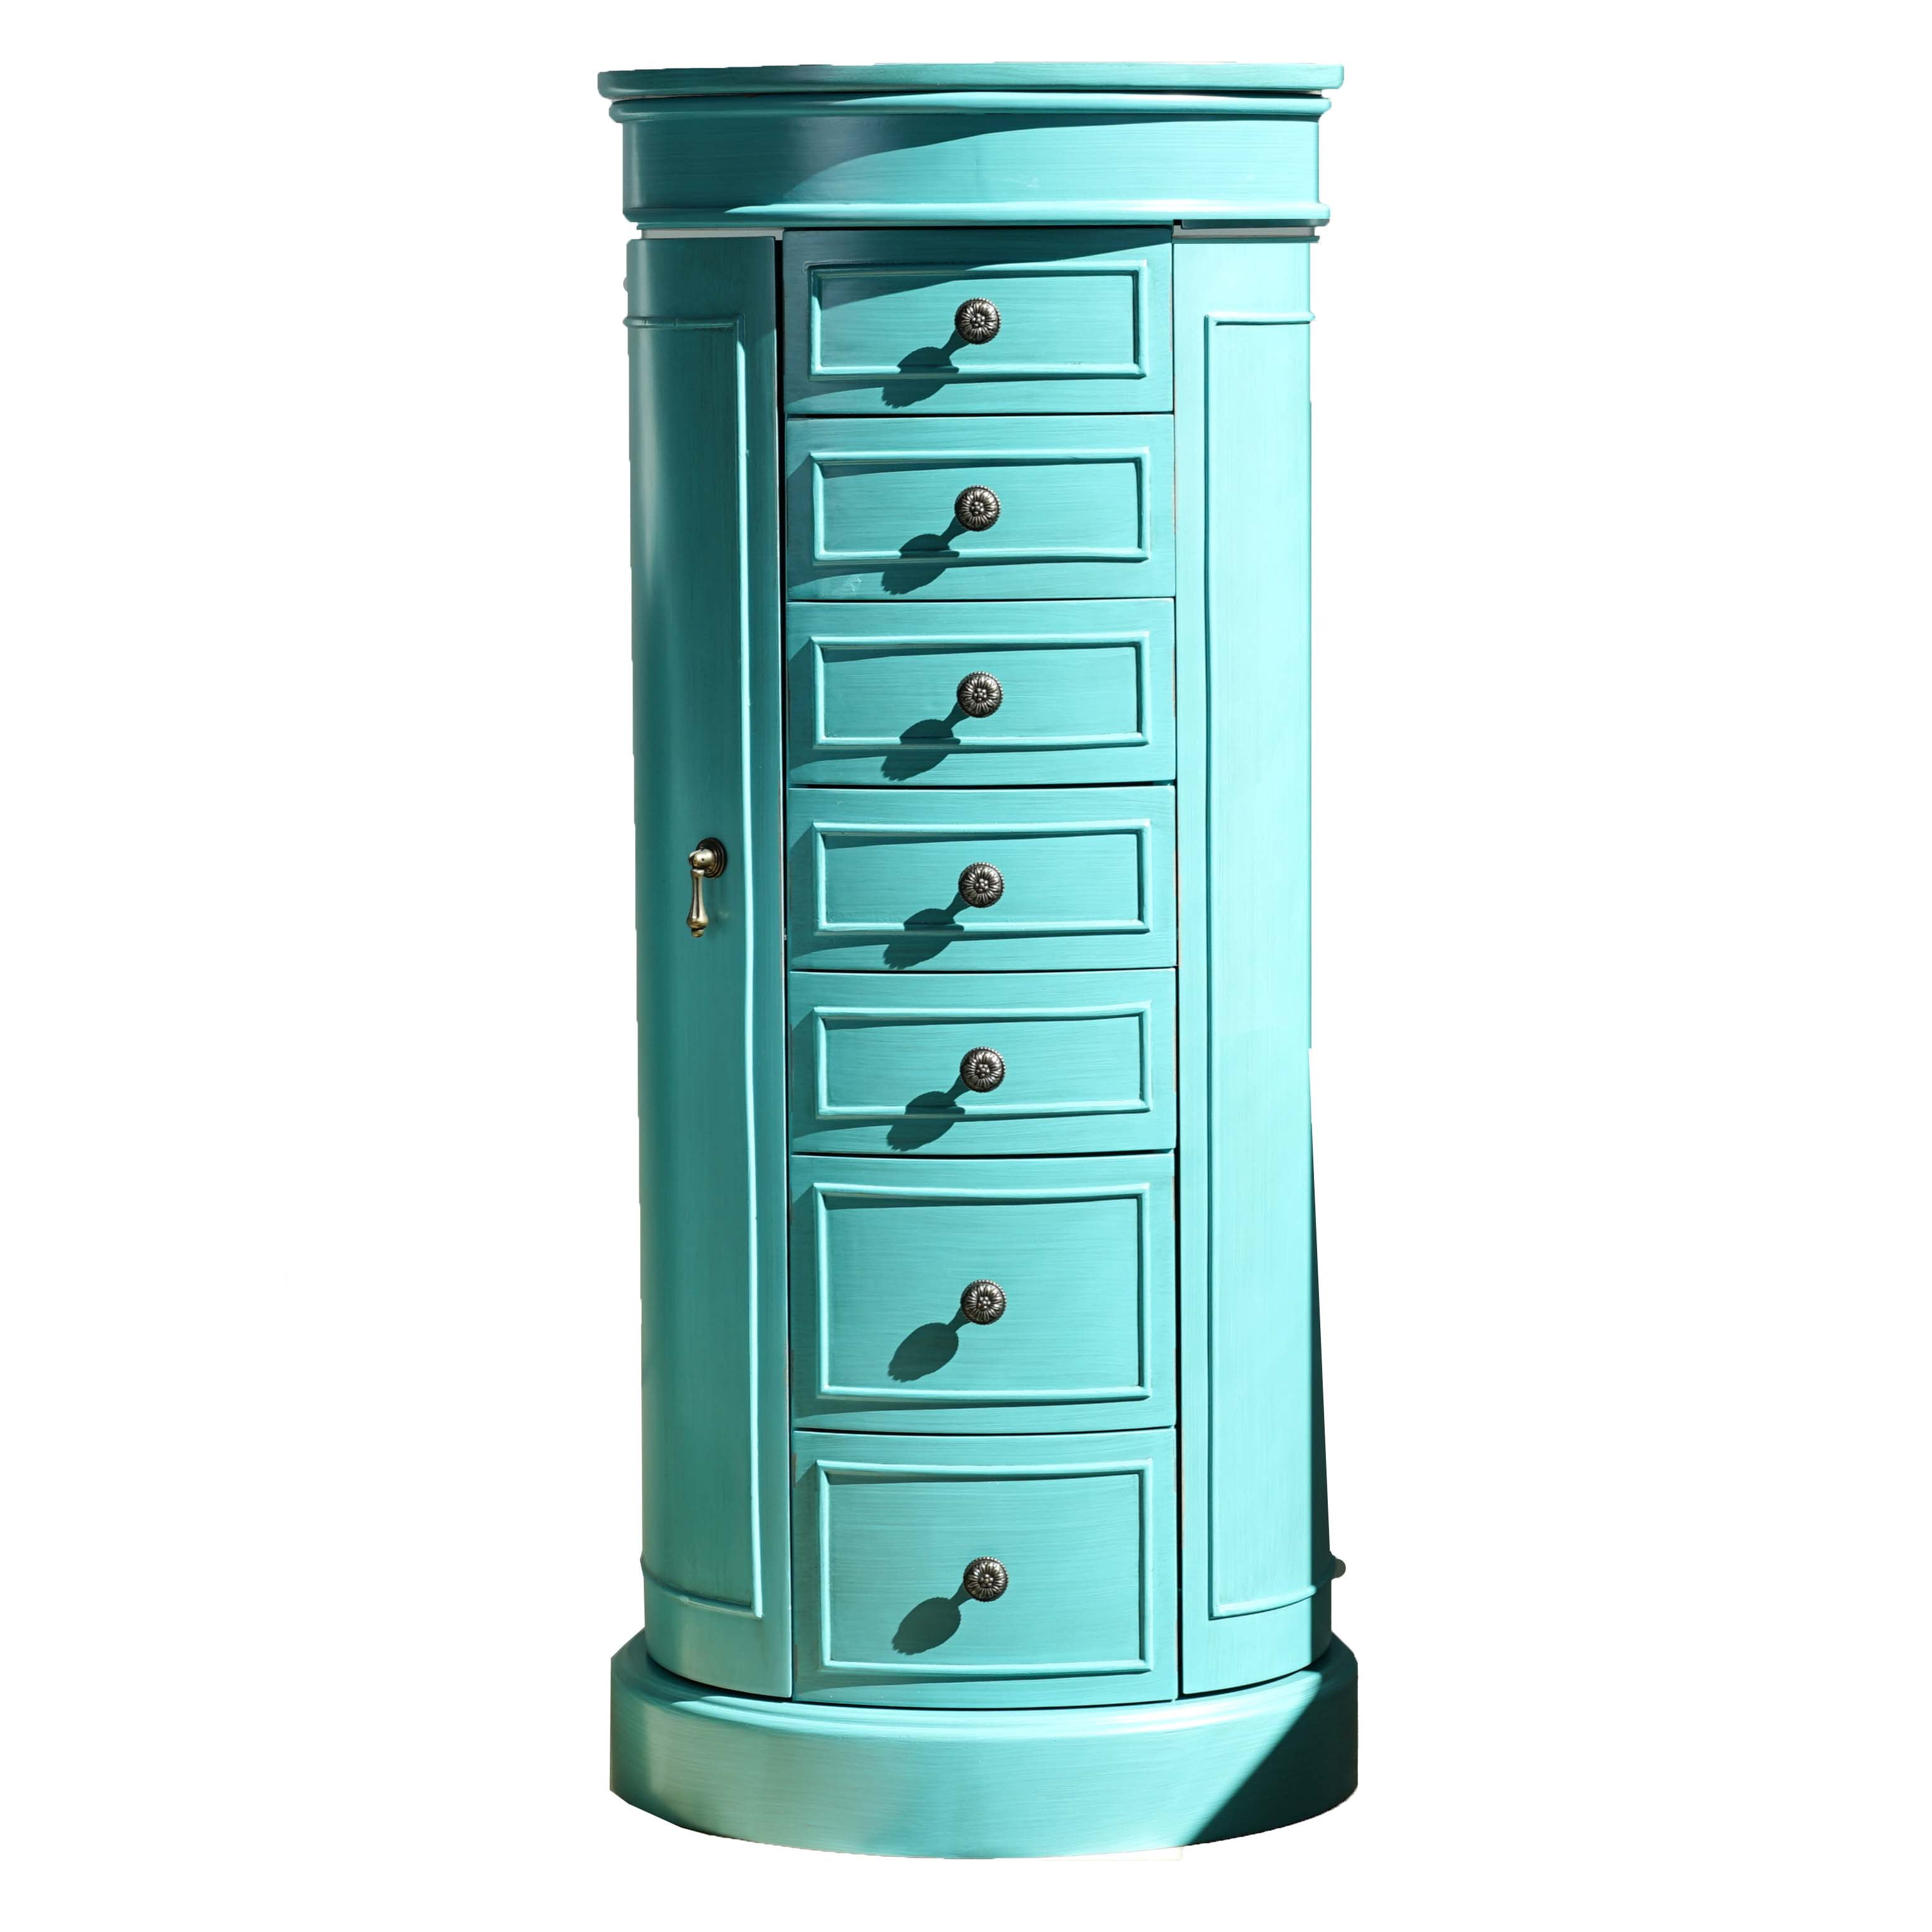 Fully Locking Jewelry Armoire Turquoise 6 Pull Out Drawers Organizers Furniture 